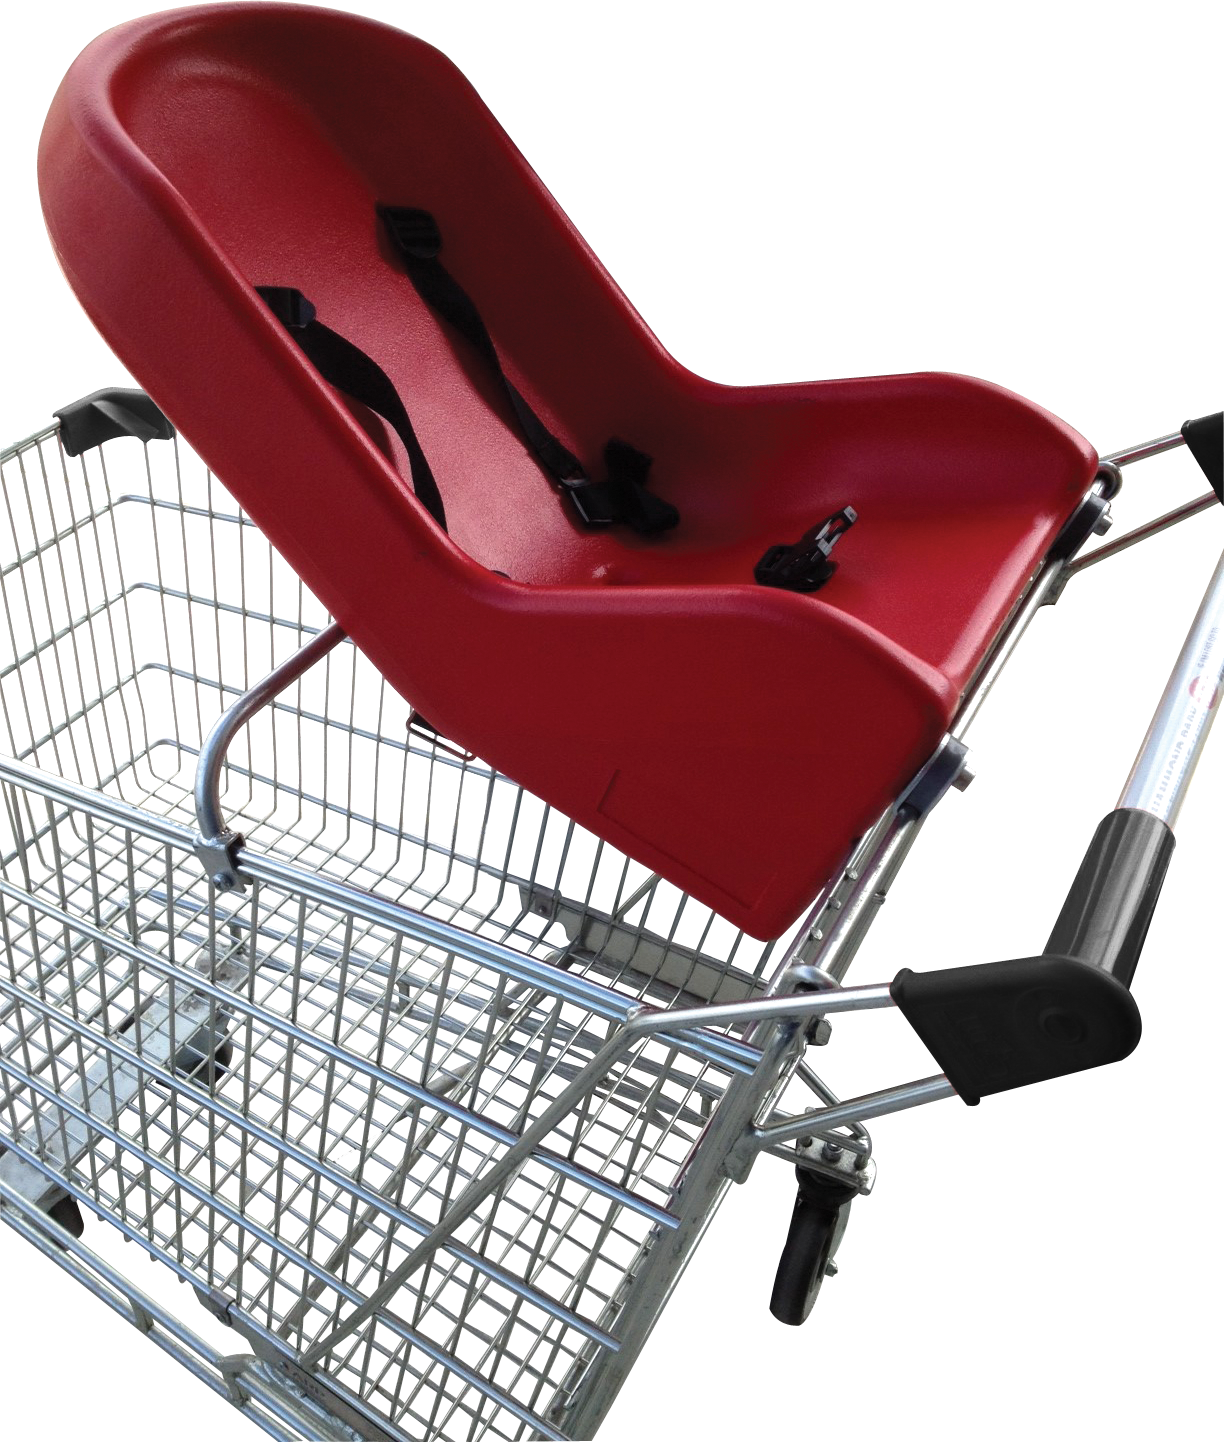 trt-cit-013, Trolley Baby Capsule , Shopping Trolleys from Astrolift